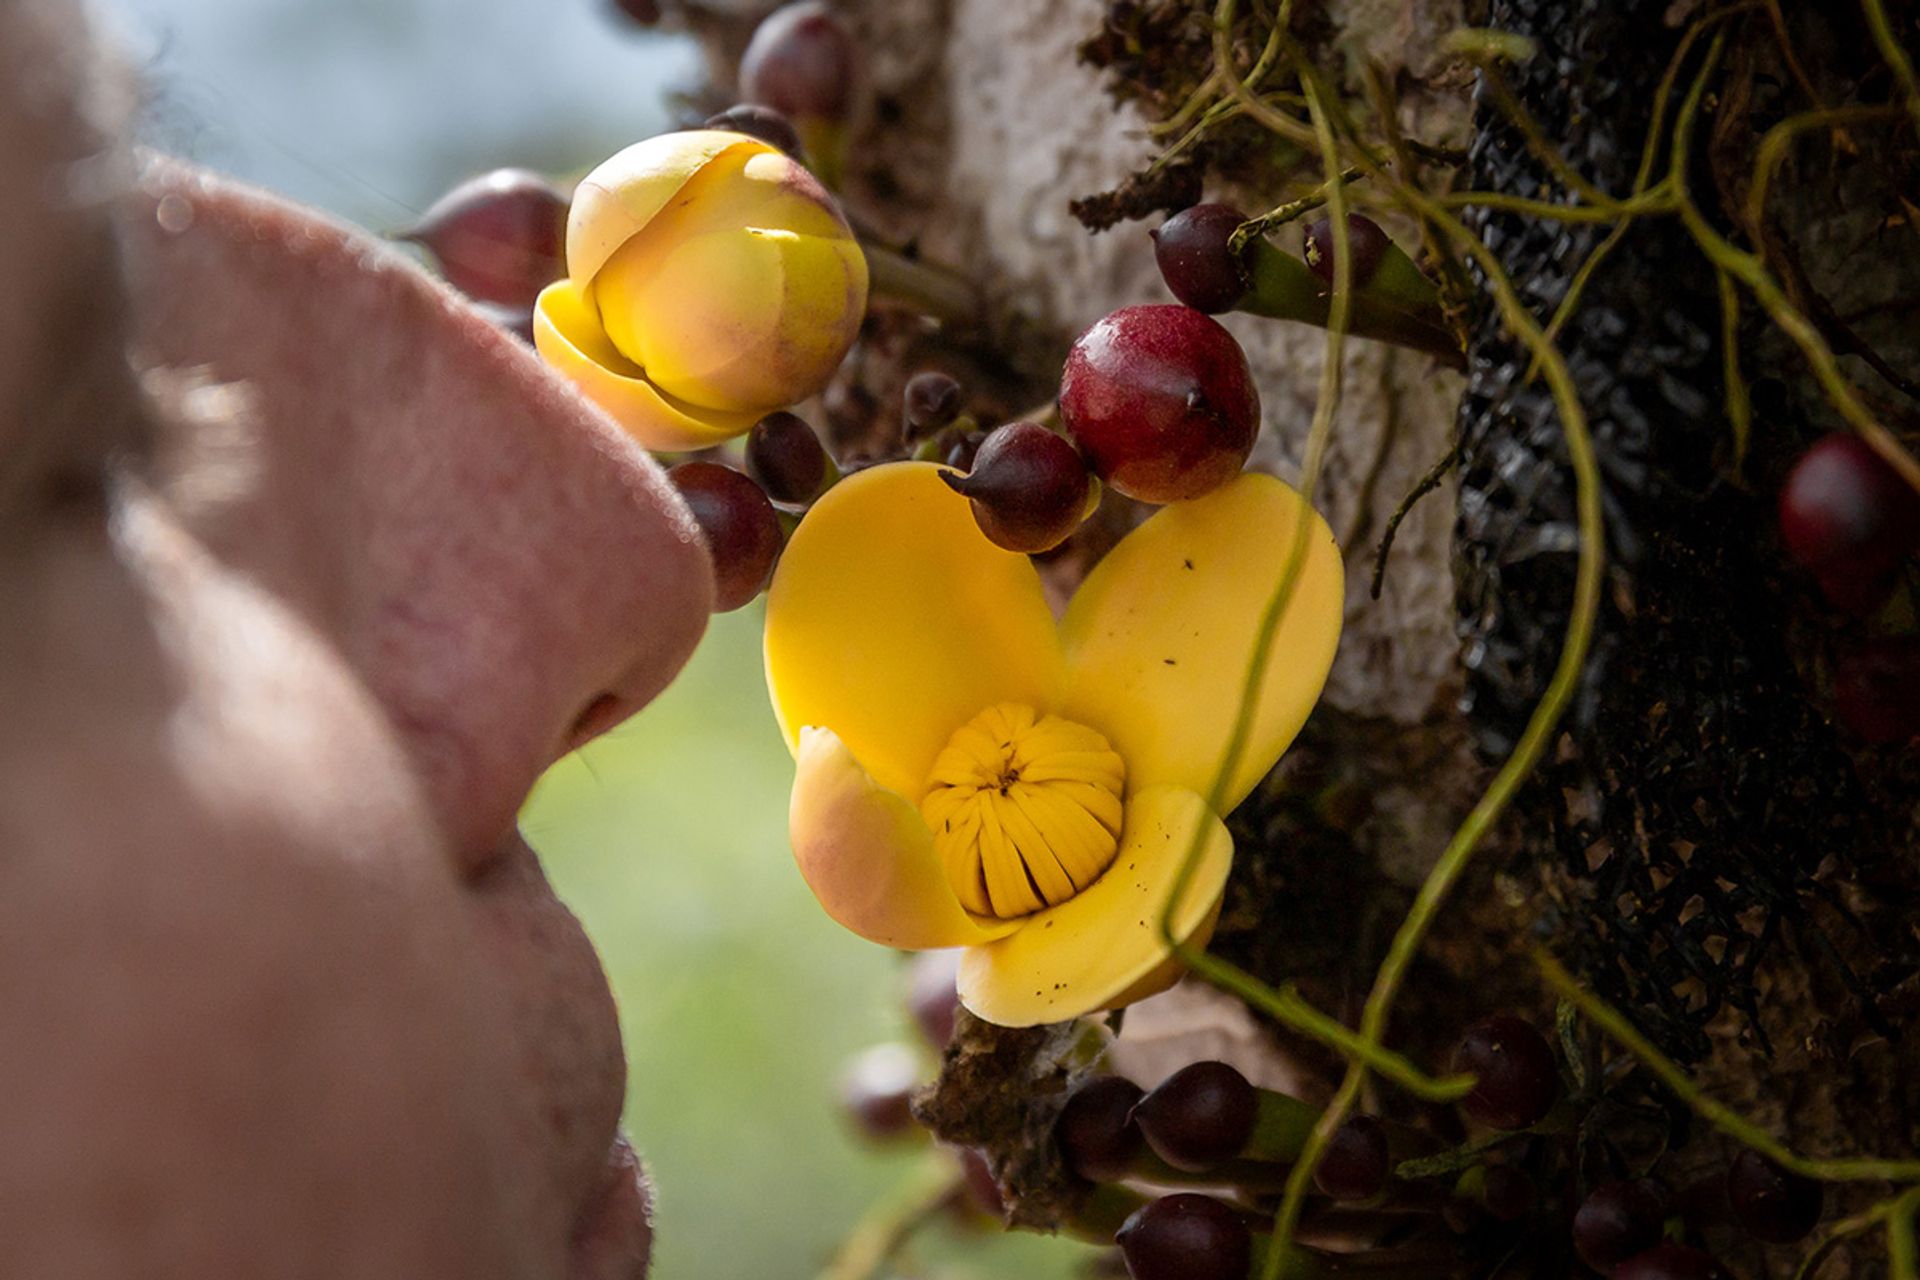 Mr van der Schans smelling a Grias neuberthii flower located in Ecuagenera’s grounds in El Pangui. The yellow flowers grows directly on the trunk and has a light floral scent.